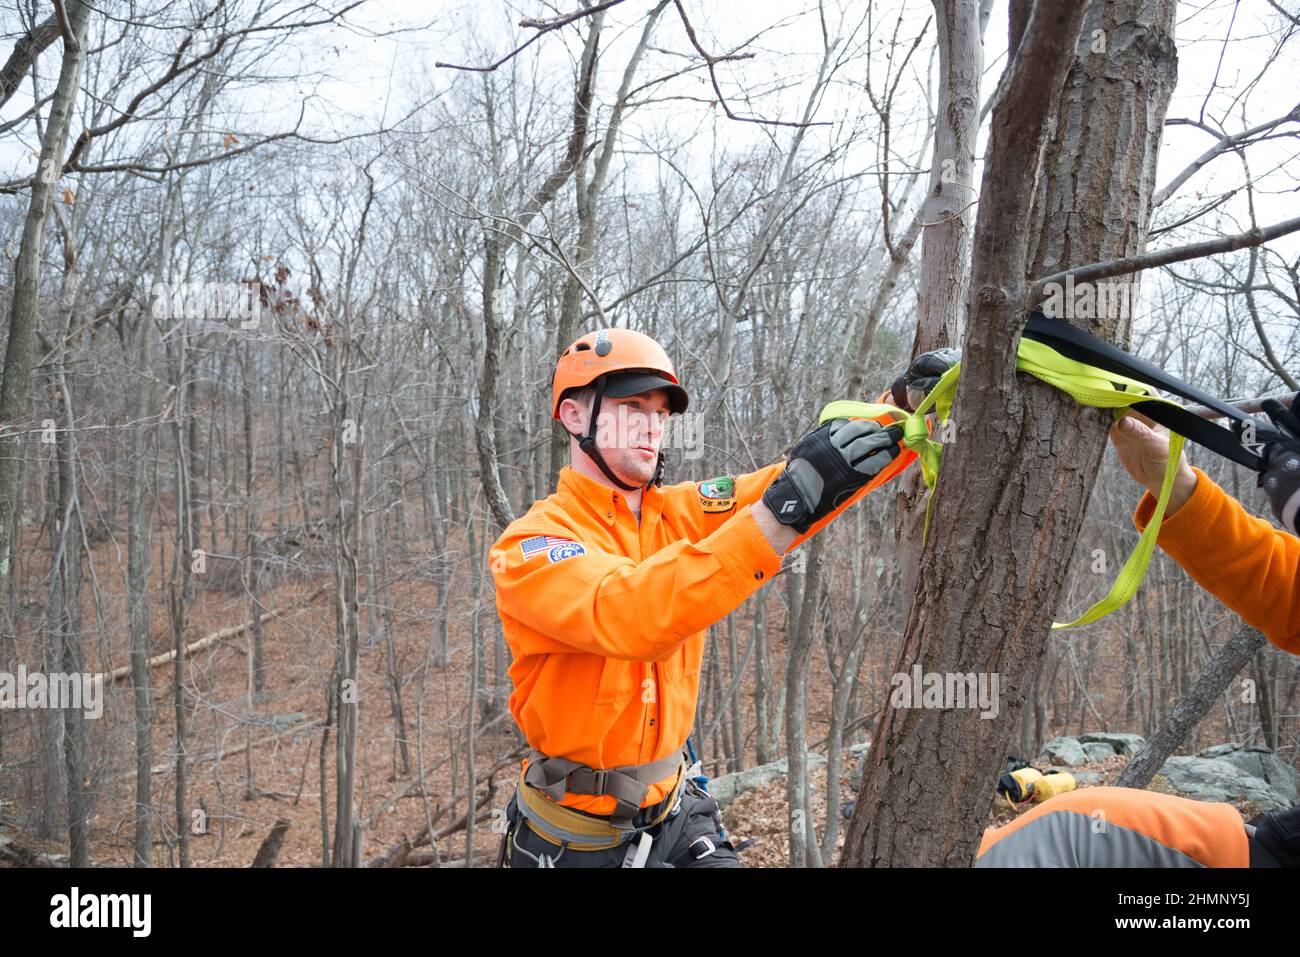 New Jersey Search and Rescue (NJSAR) Mountain Rescue Unit practice